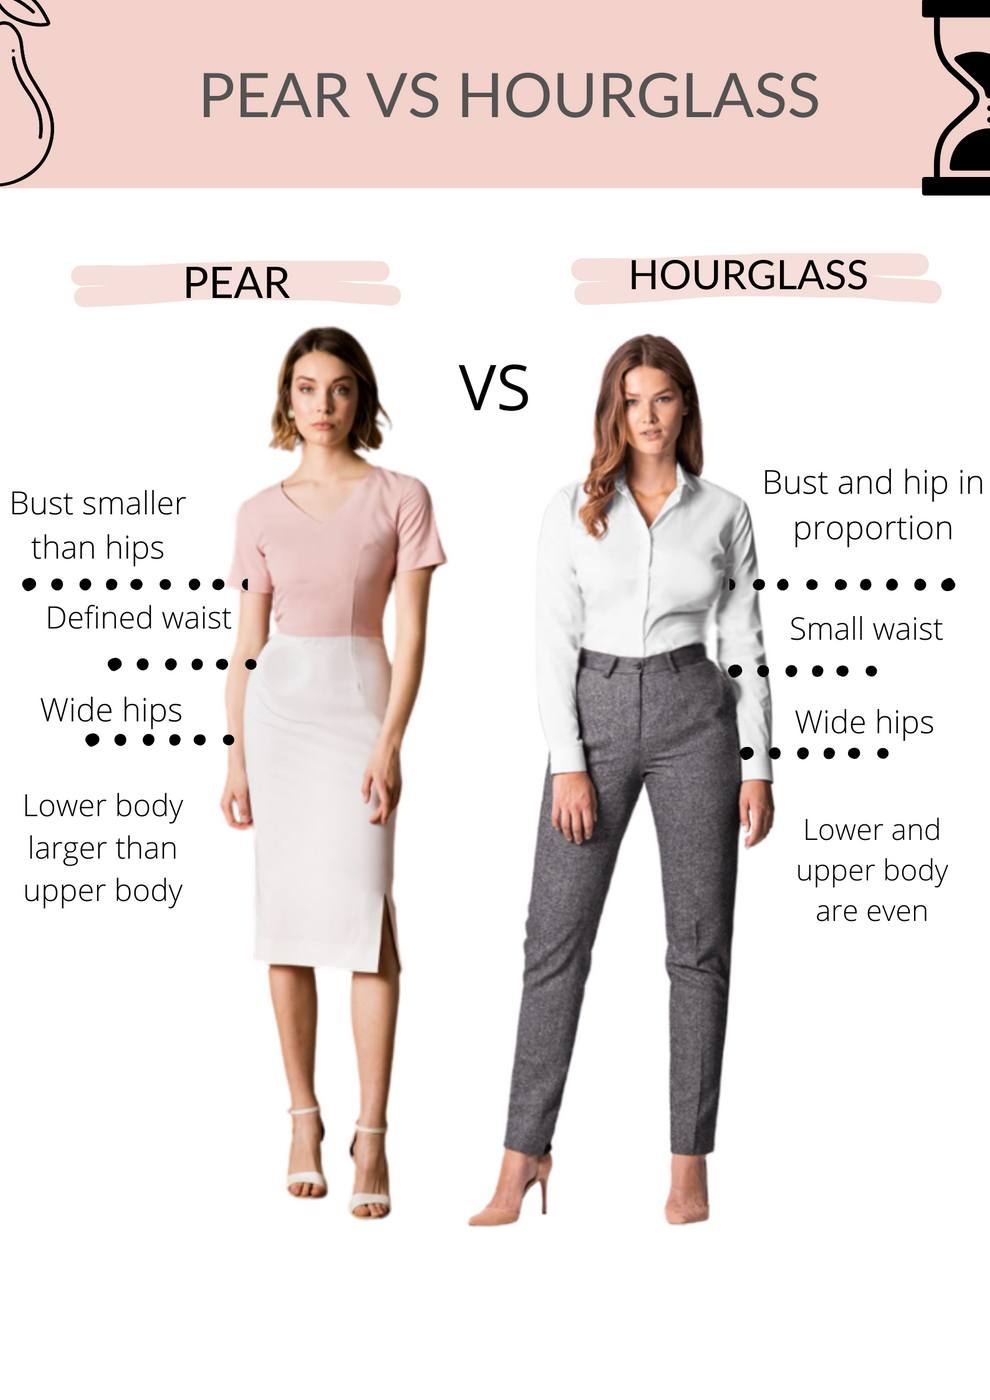 Pear Shaped Women: The Ultimate Styling Guide - Petite Dressing